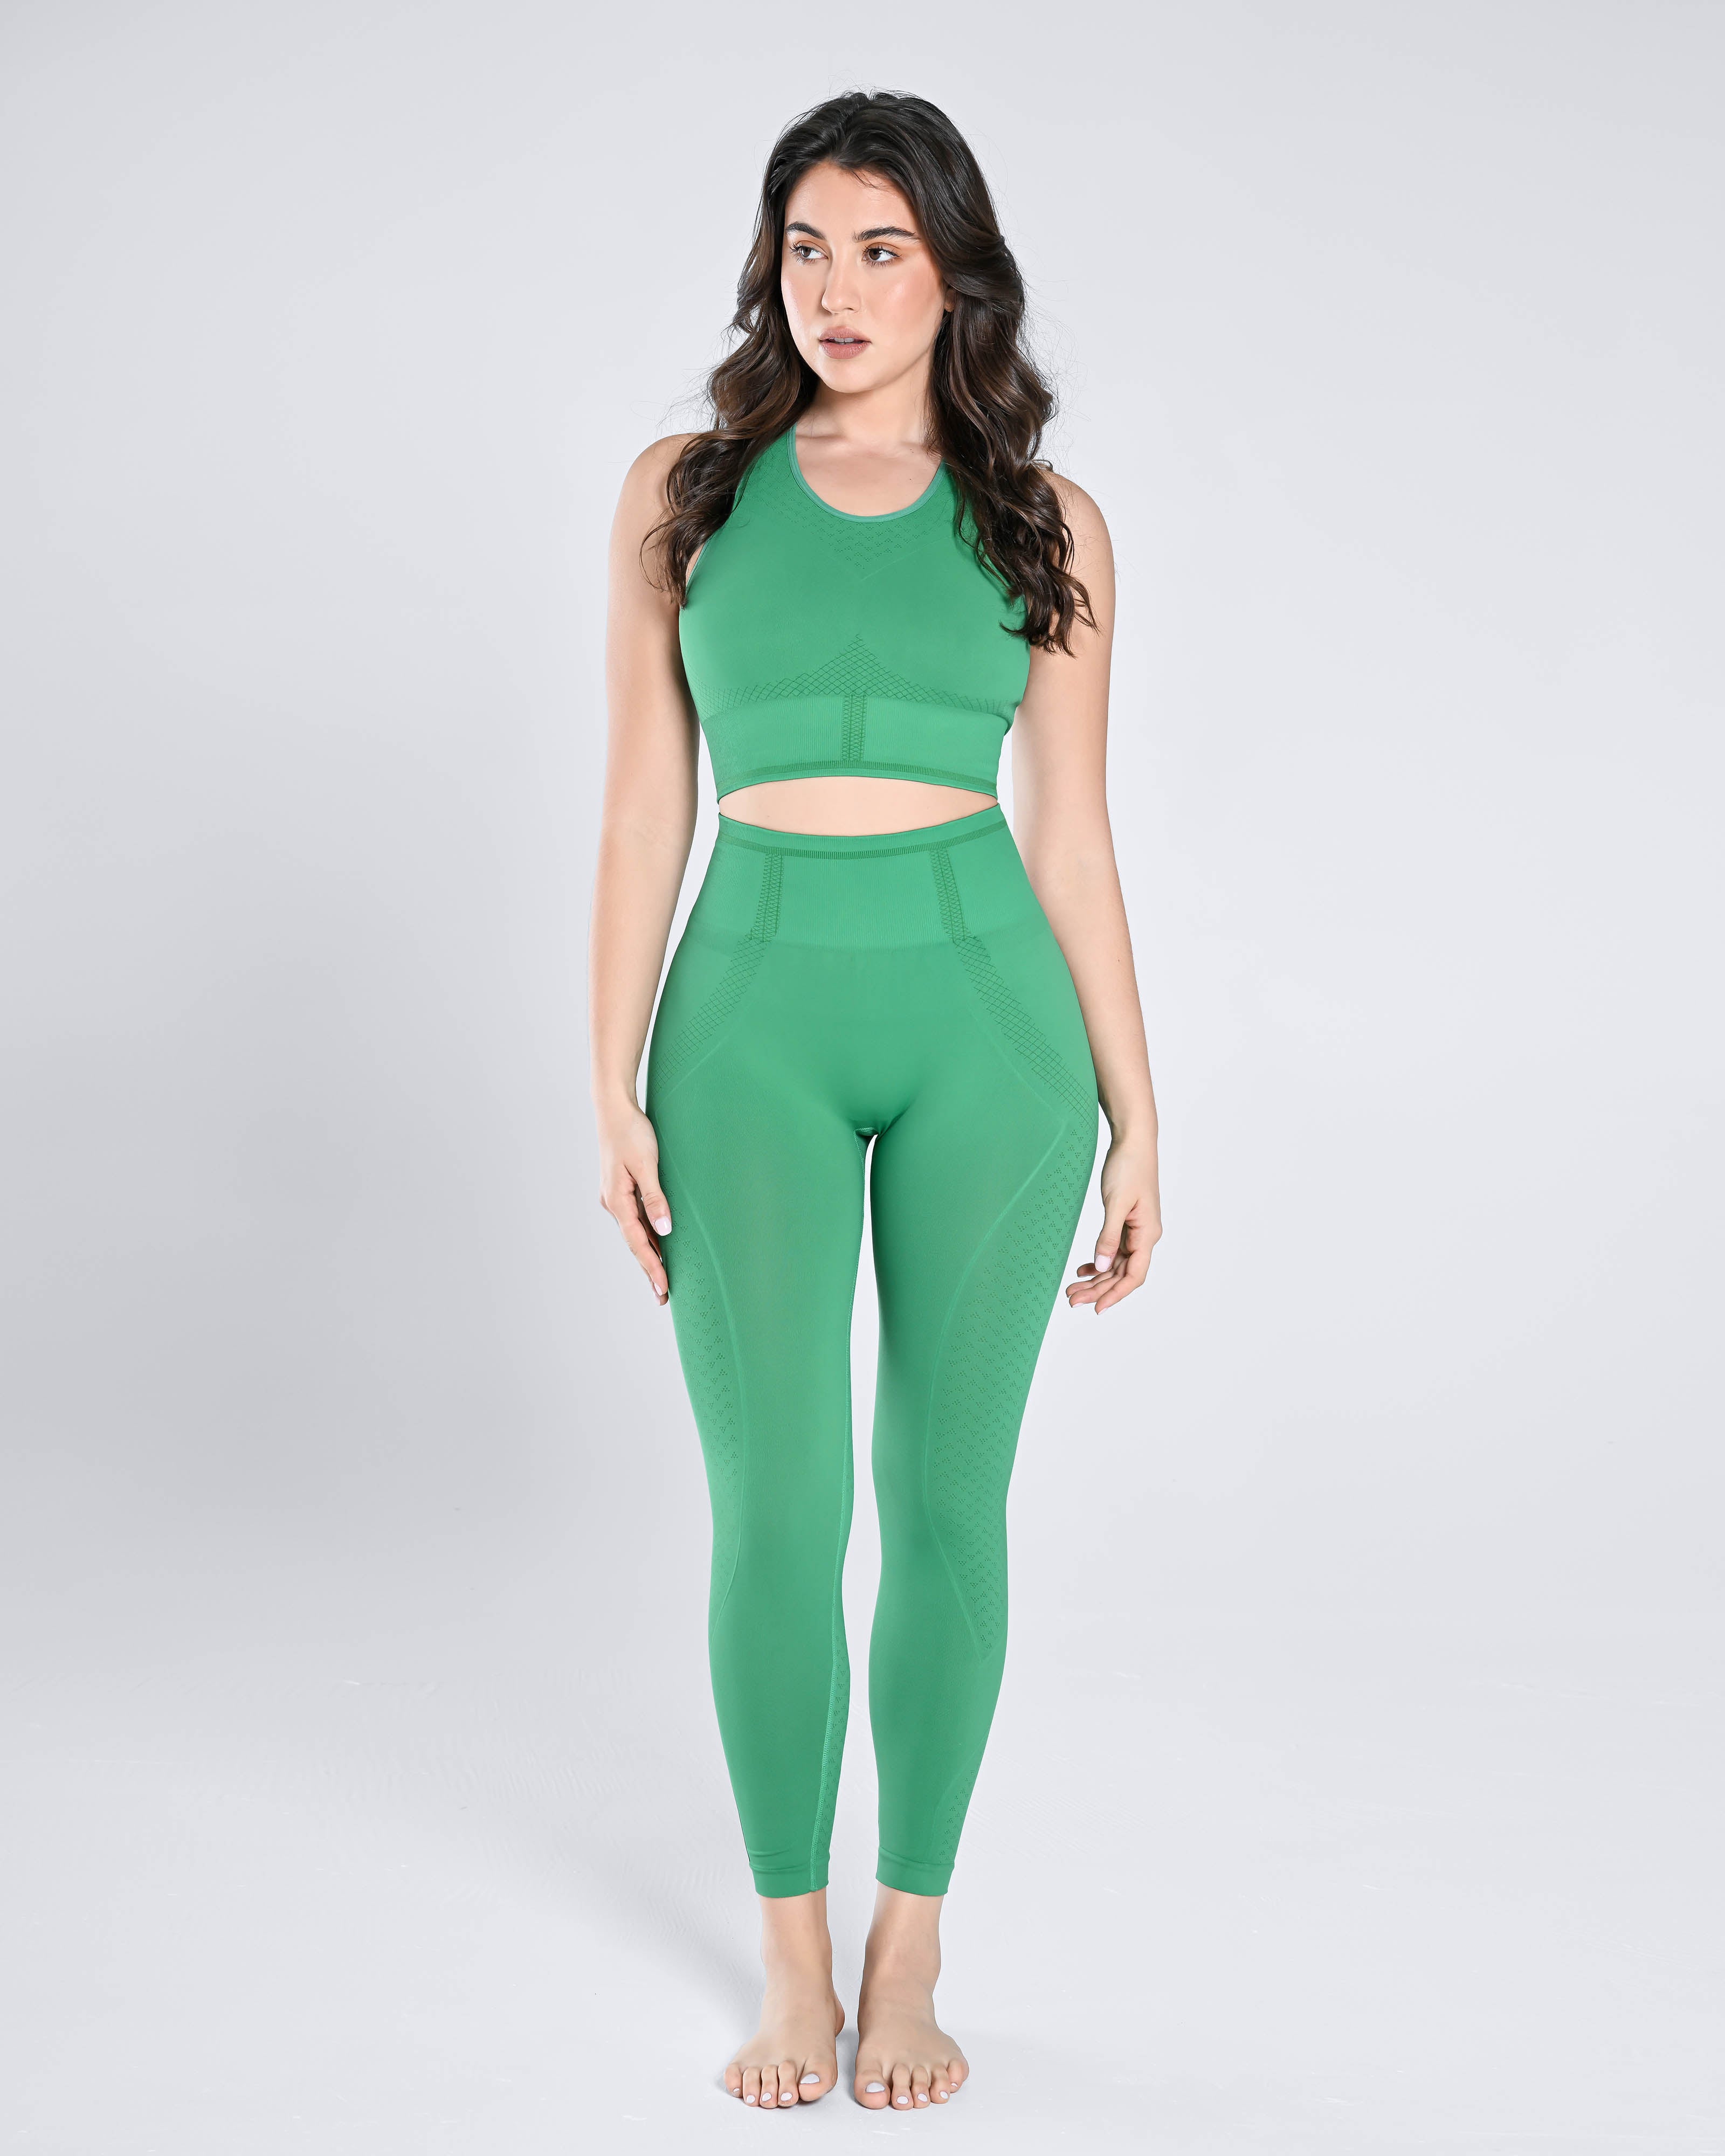 Le Troupè: Stand Out From the Crowd with Stylish and Sustainable Cosmolle  Activewear